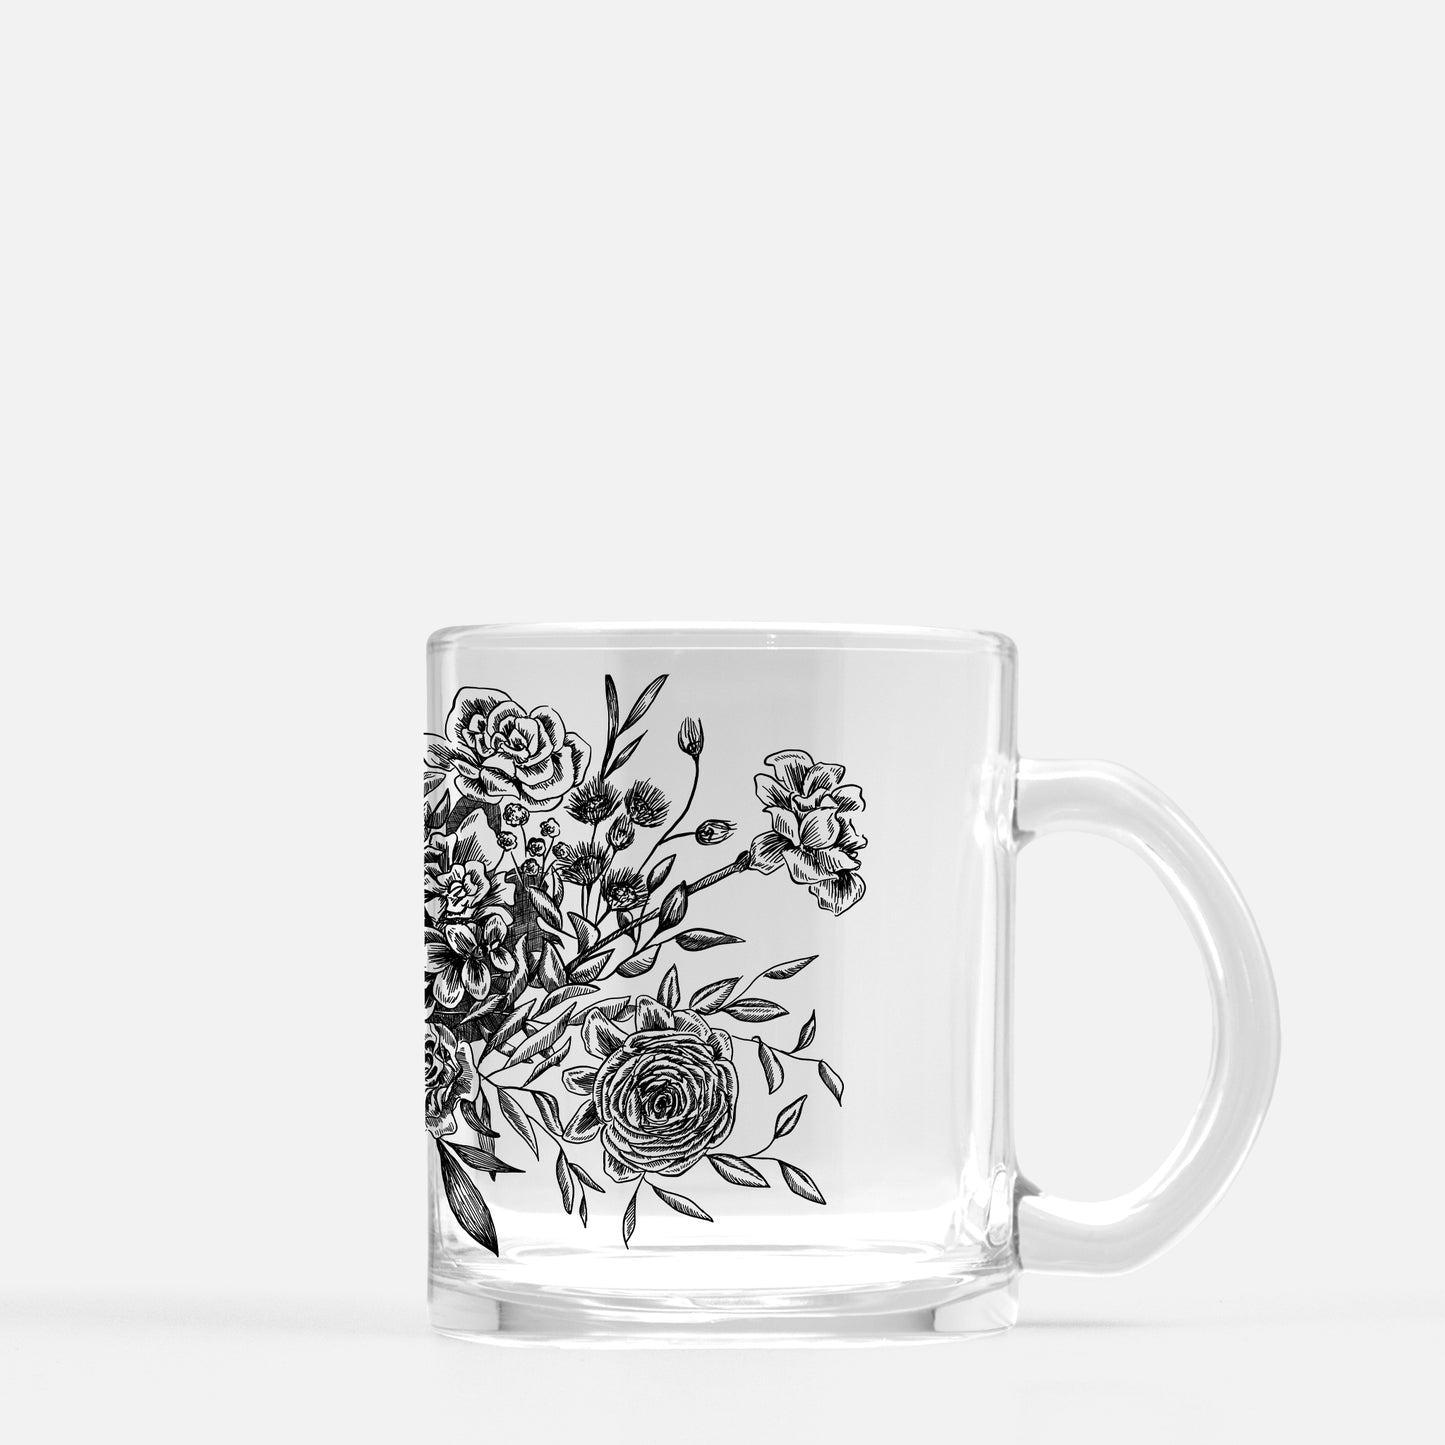 10x10 White Mugs & Dried Flowers with a Black Frame – PINCH